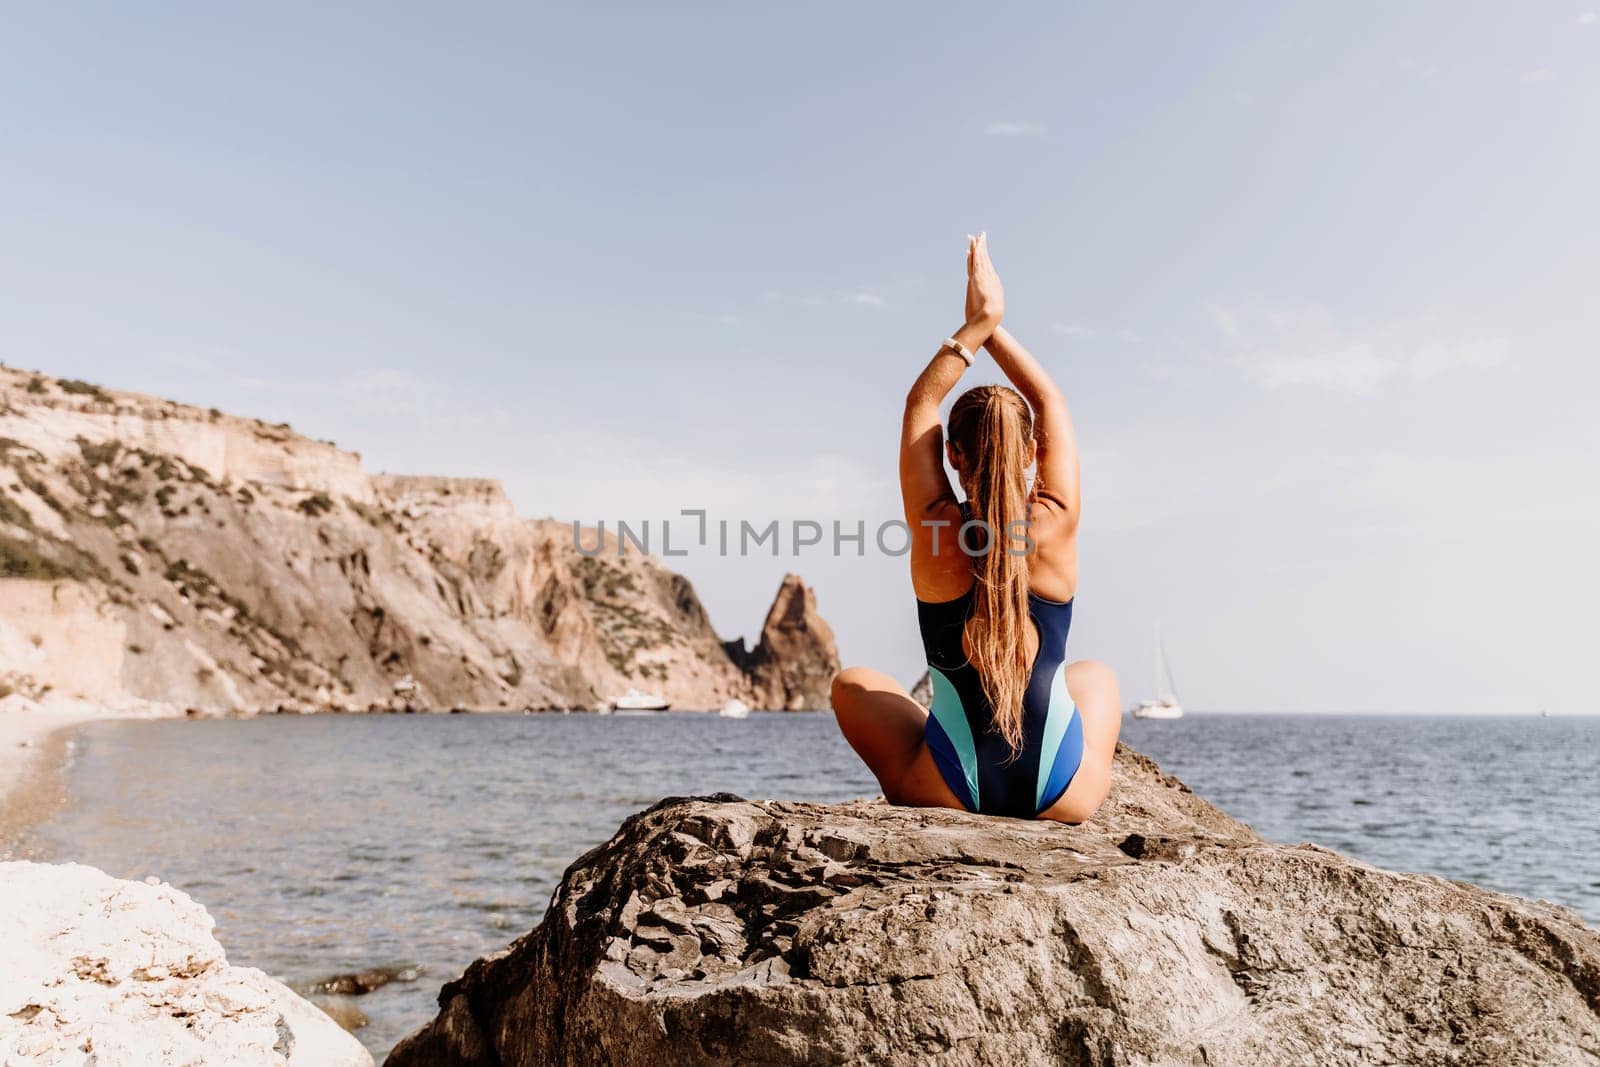 Yoga on the beach. A happy woman meditating in a yoga pose on the beach, surrounded by the ocean and rock mountains, promoting a healthy lifestyle outdoors in nature, and inspiring fitness concept